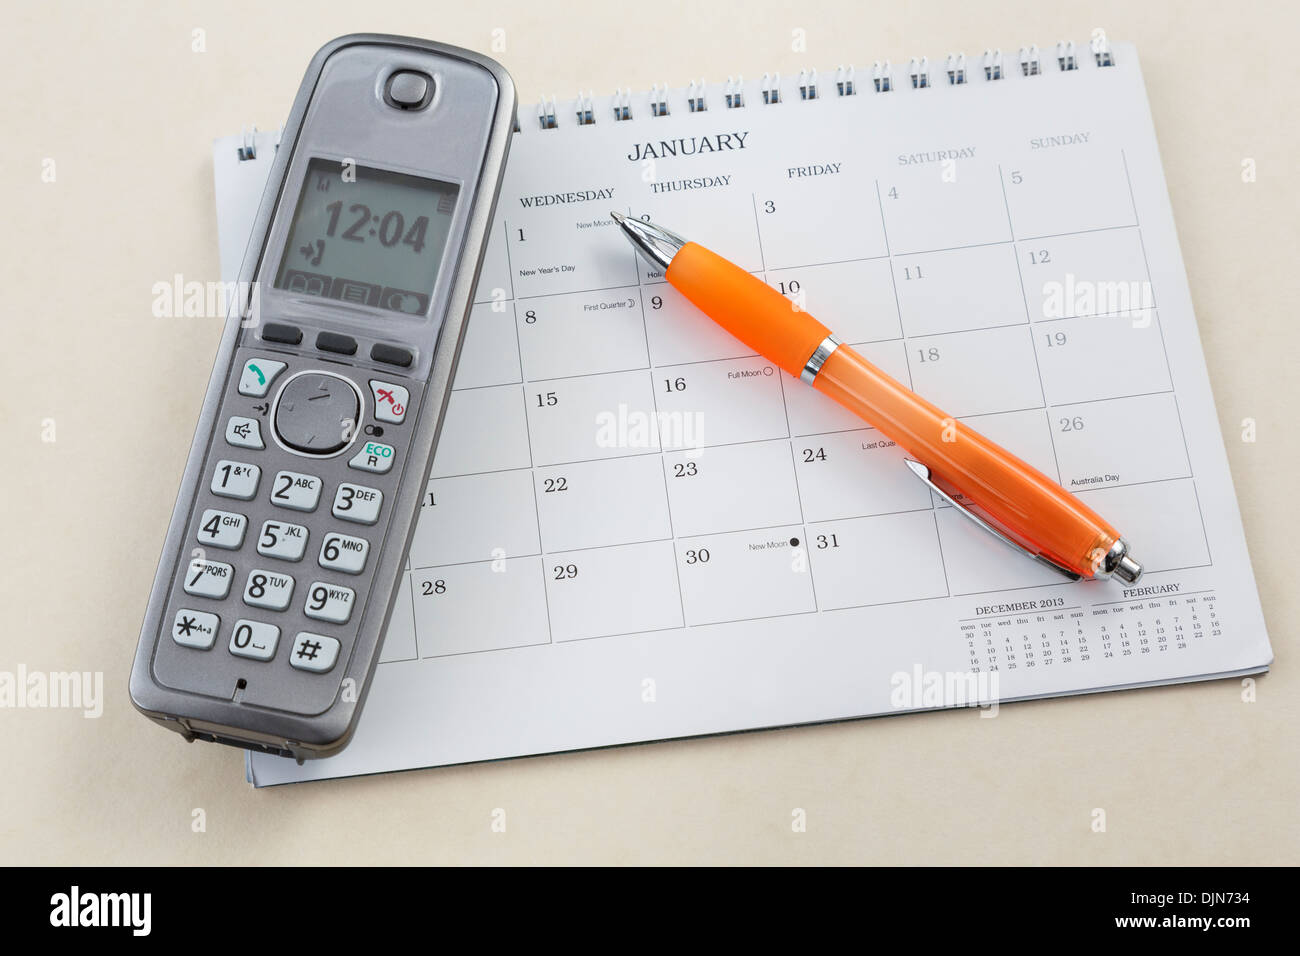 Cordless telephone handset with a pen pointing to New Years Day with new moon on a blank calendar page for January 2014 Stock Photo